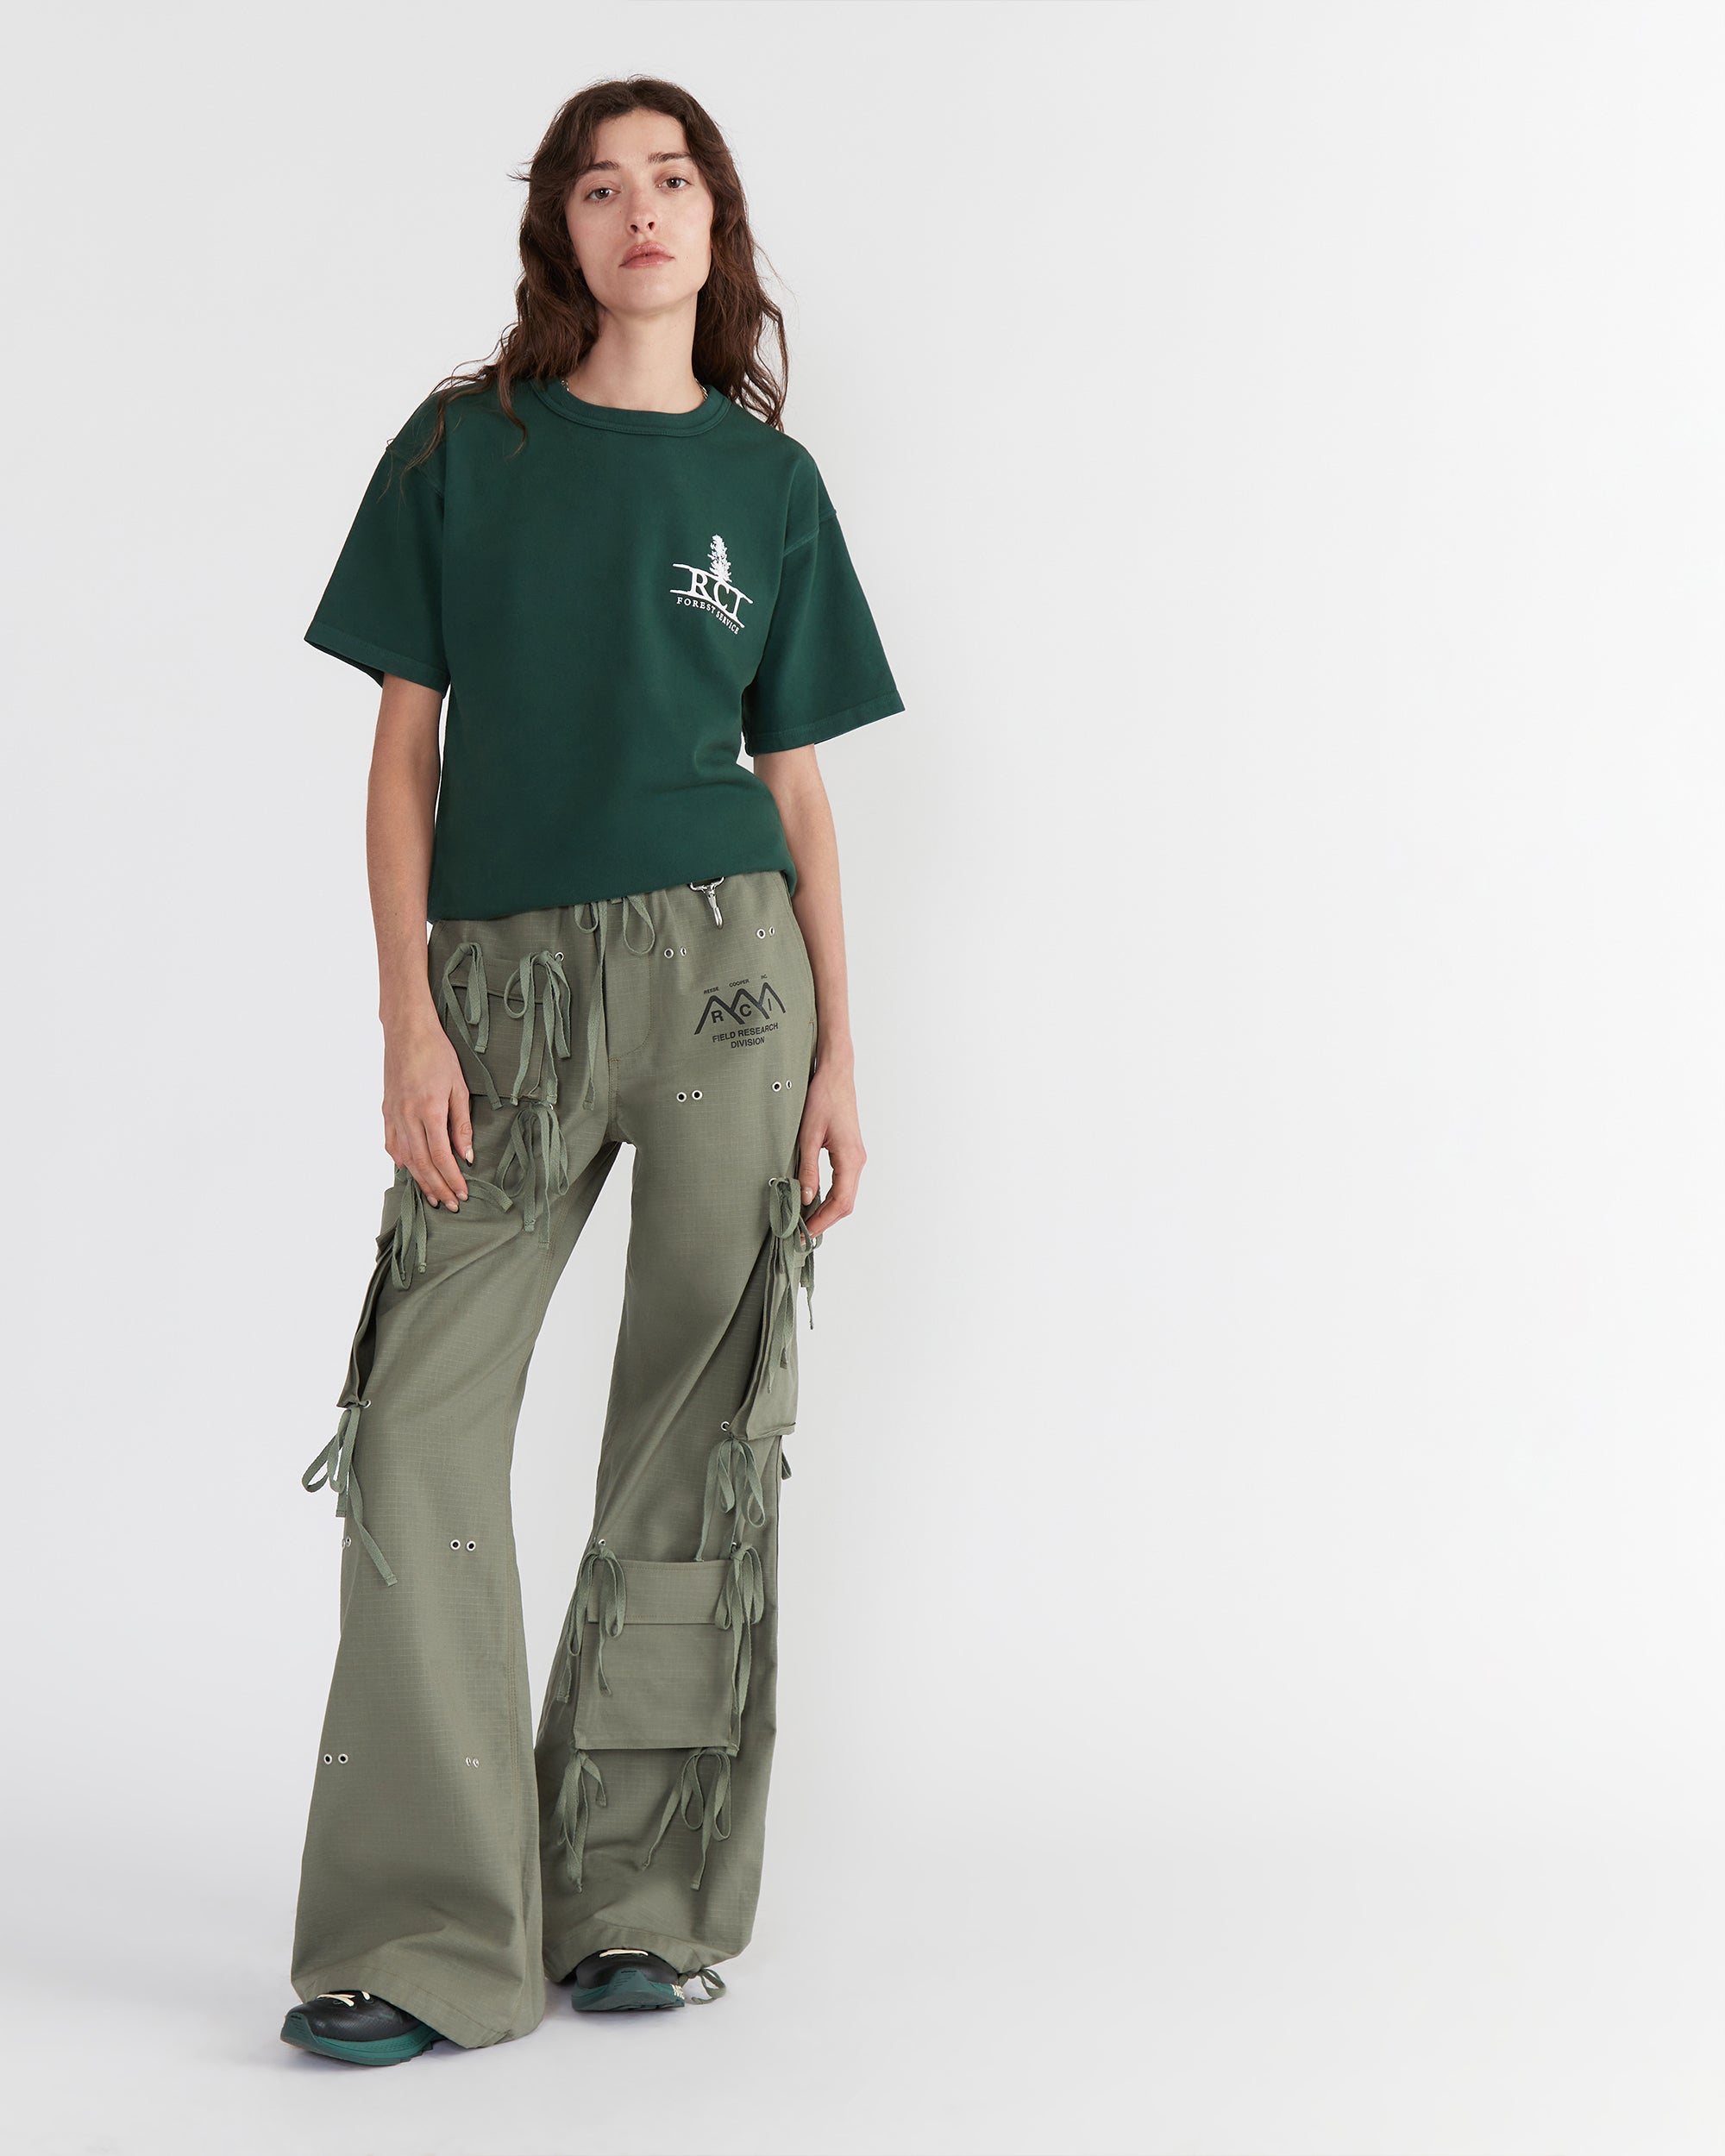 Women - Roots Tee - Forest - 1